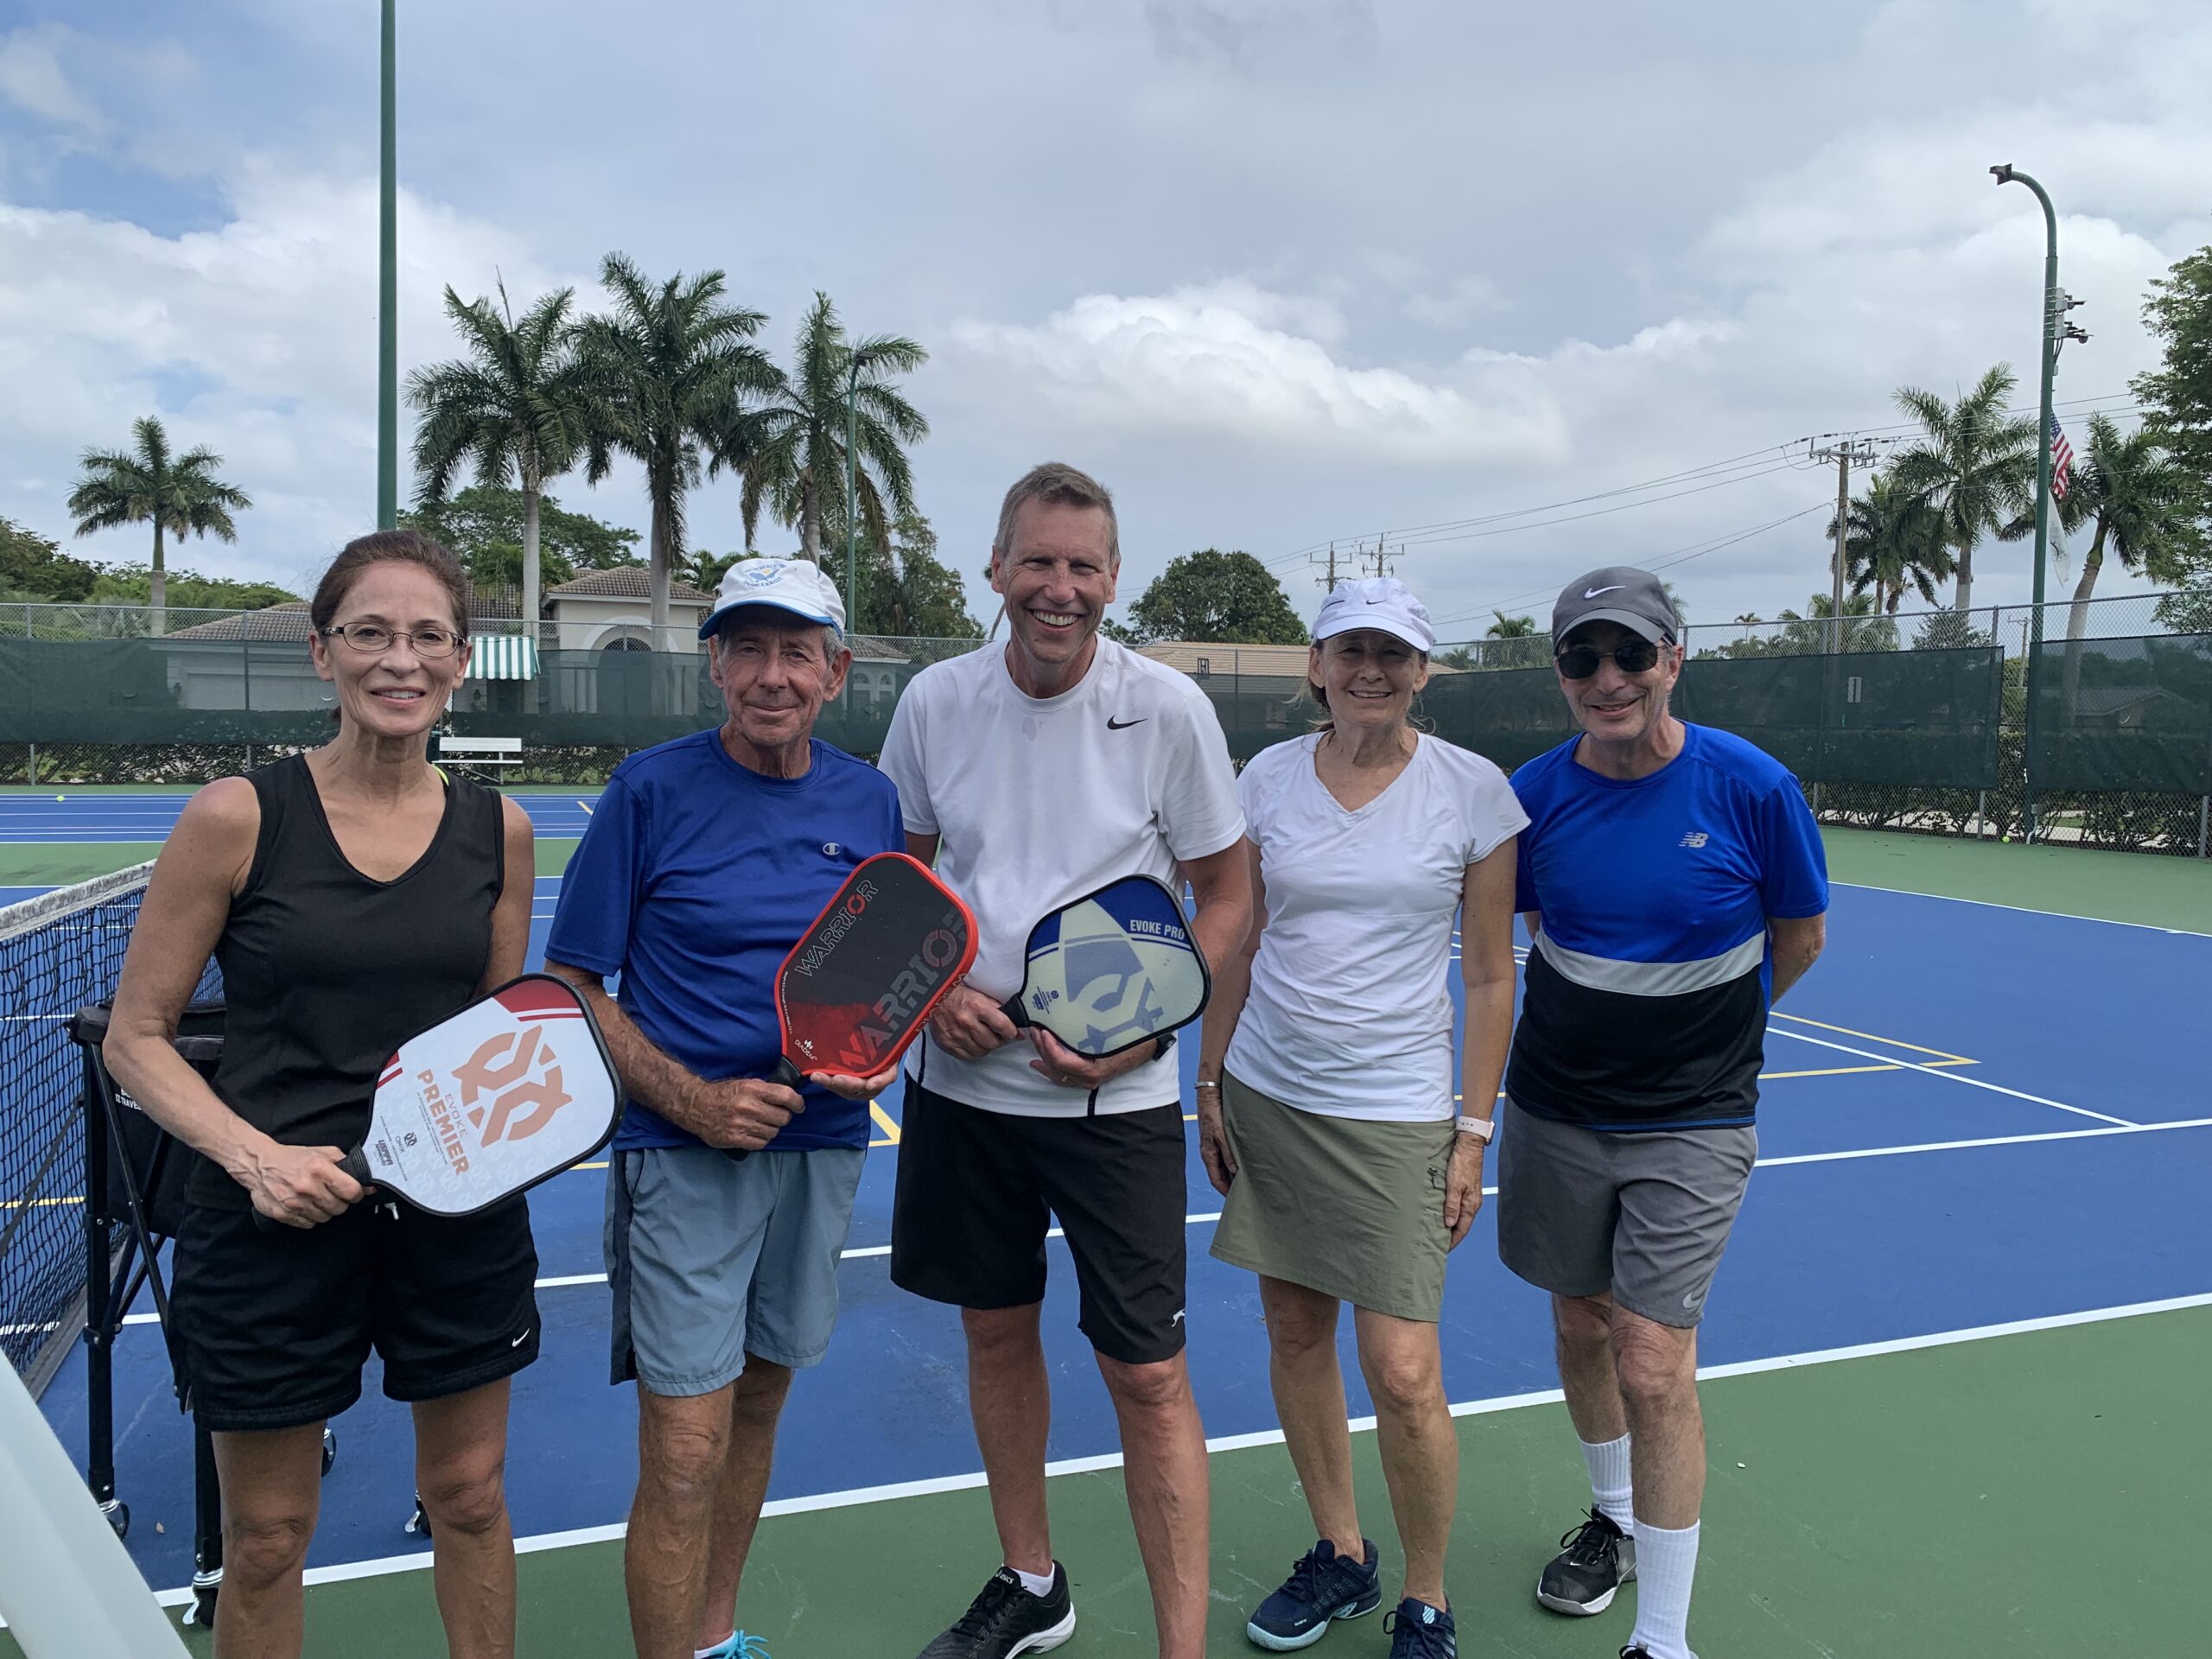 bob-with-allison-jack-diana-and-abby-after-a-beginners-pickleball-clinic-i-nlake-worth